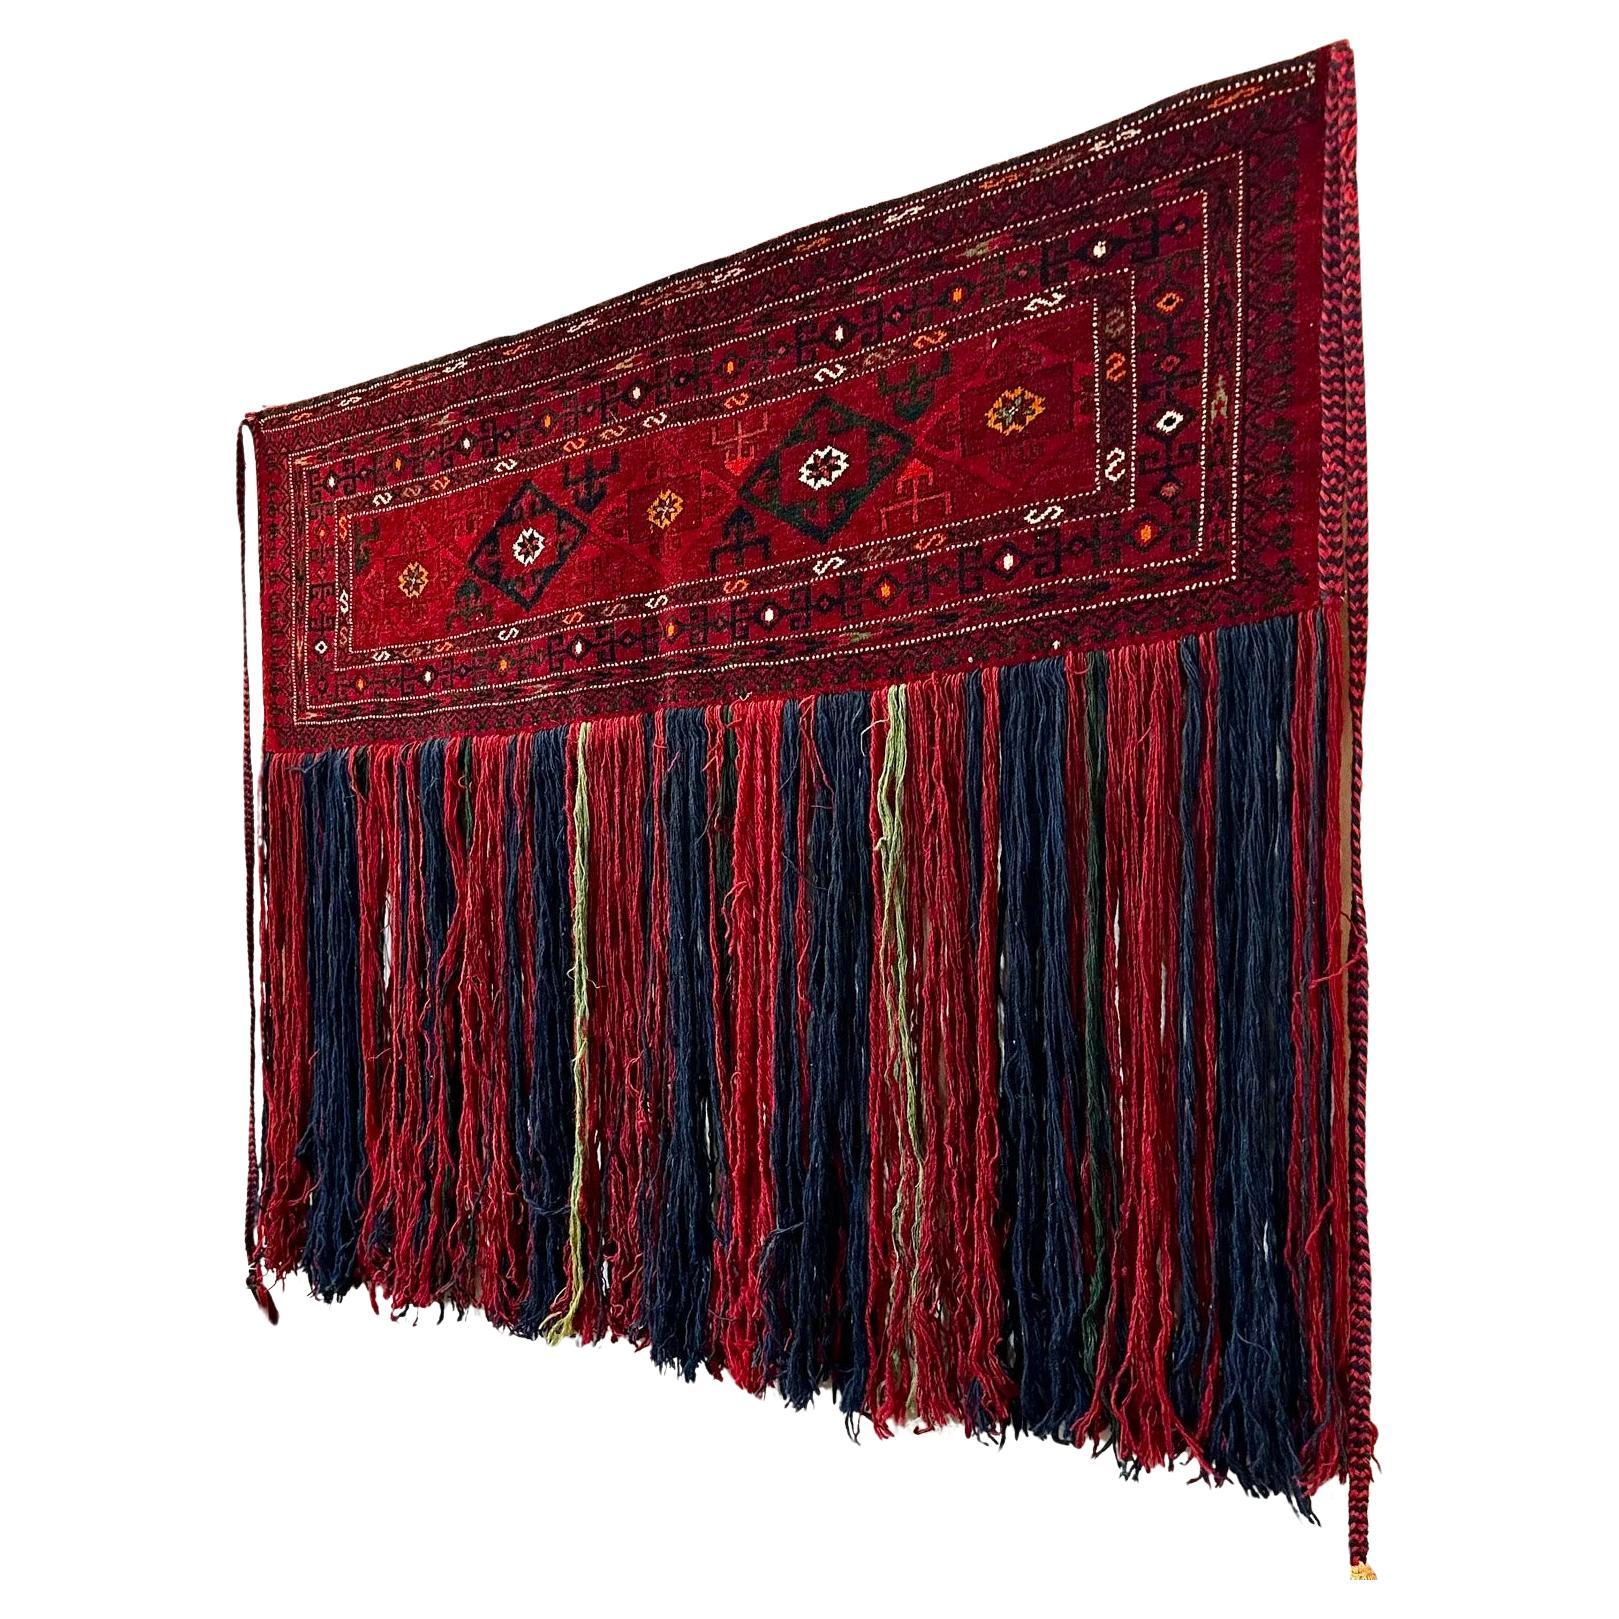 Antique Afghan Turkmen Torba Tent Bag

A wonderful, antique Afghan Turkmen Torba Tent Bag wall hanging or decorative wall covering, circa 1930s-1940s. This torba from Afghanistan Turkmenistan is in excellent original vintage condition. The original